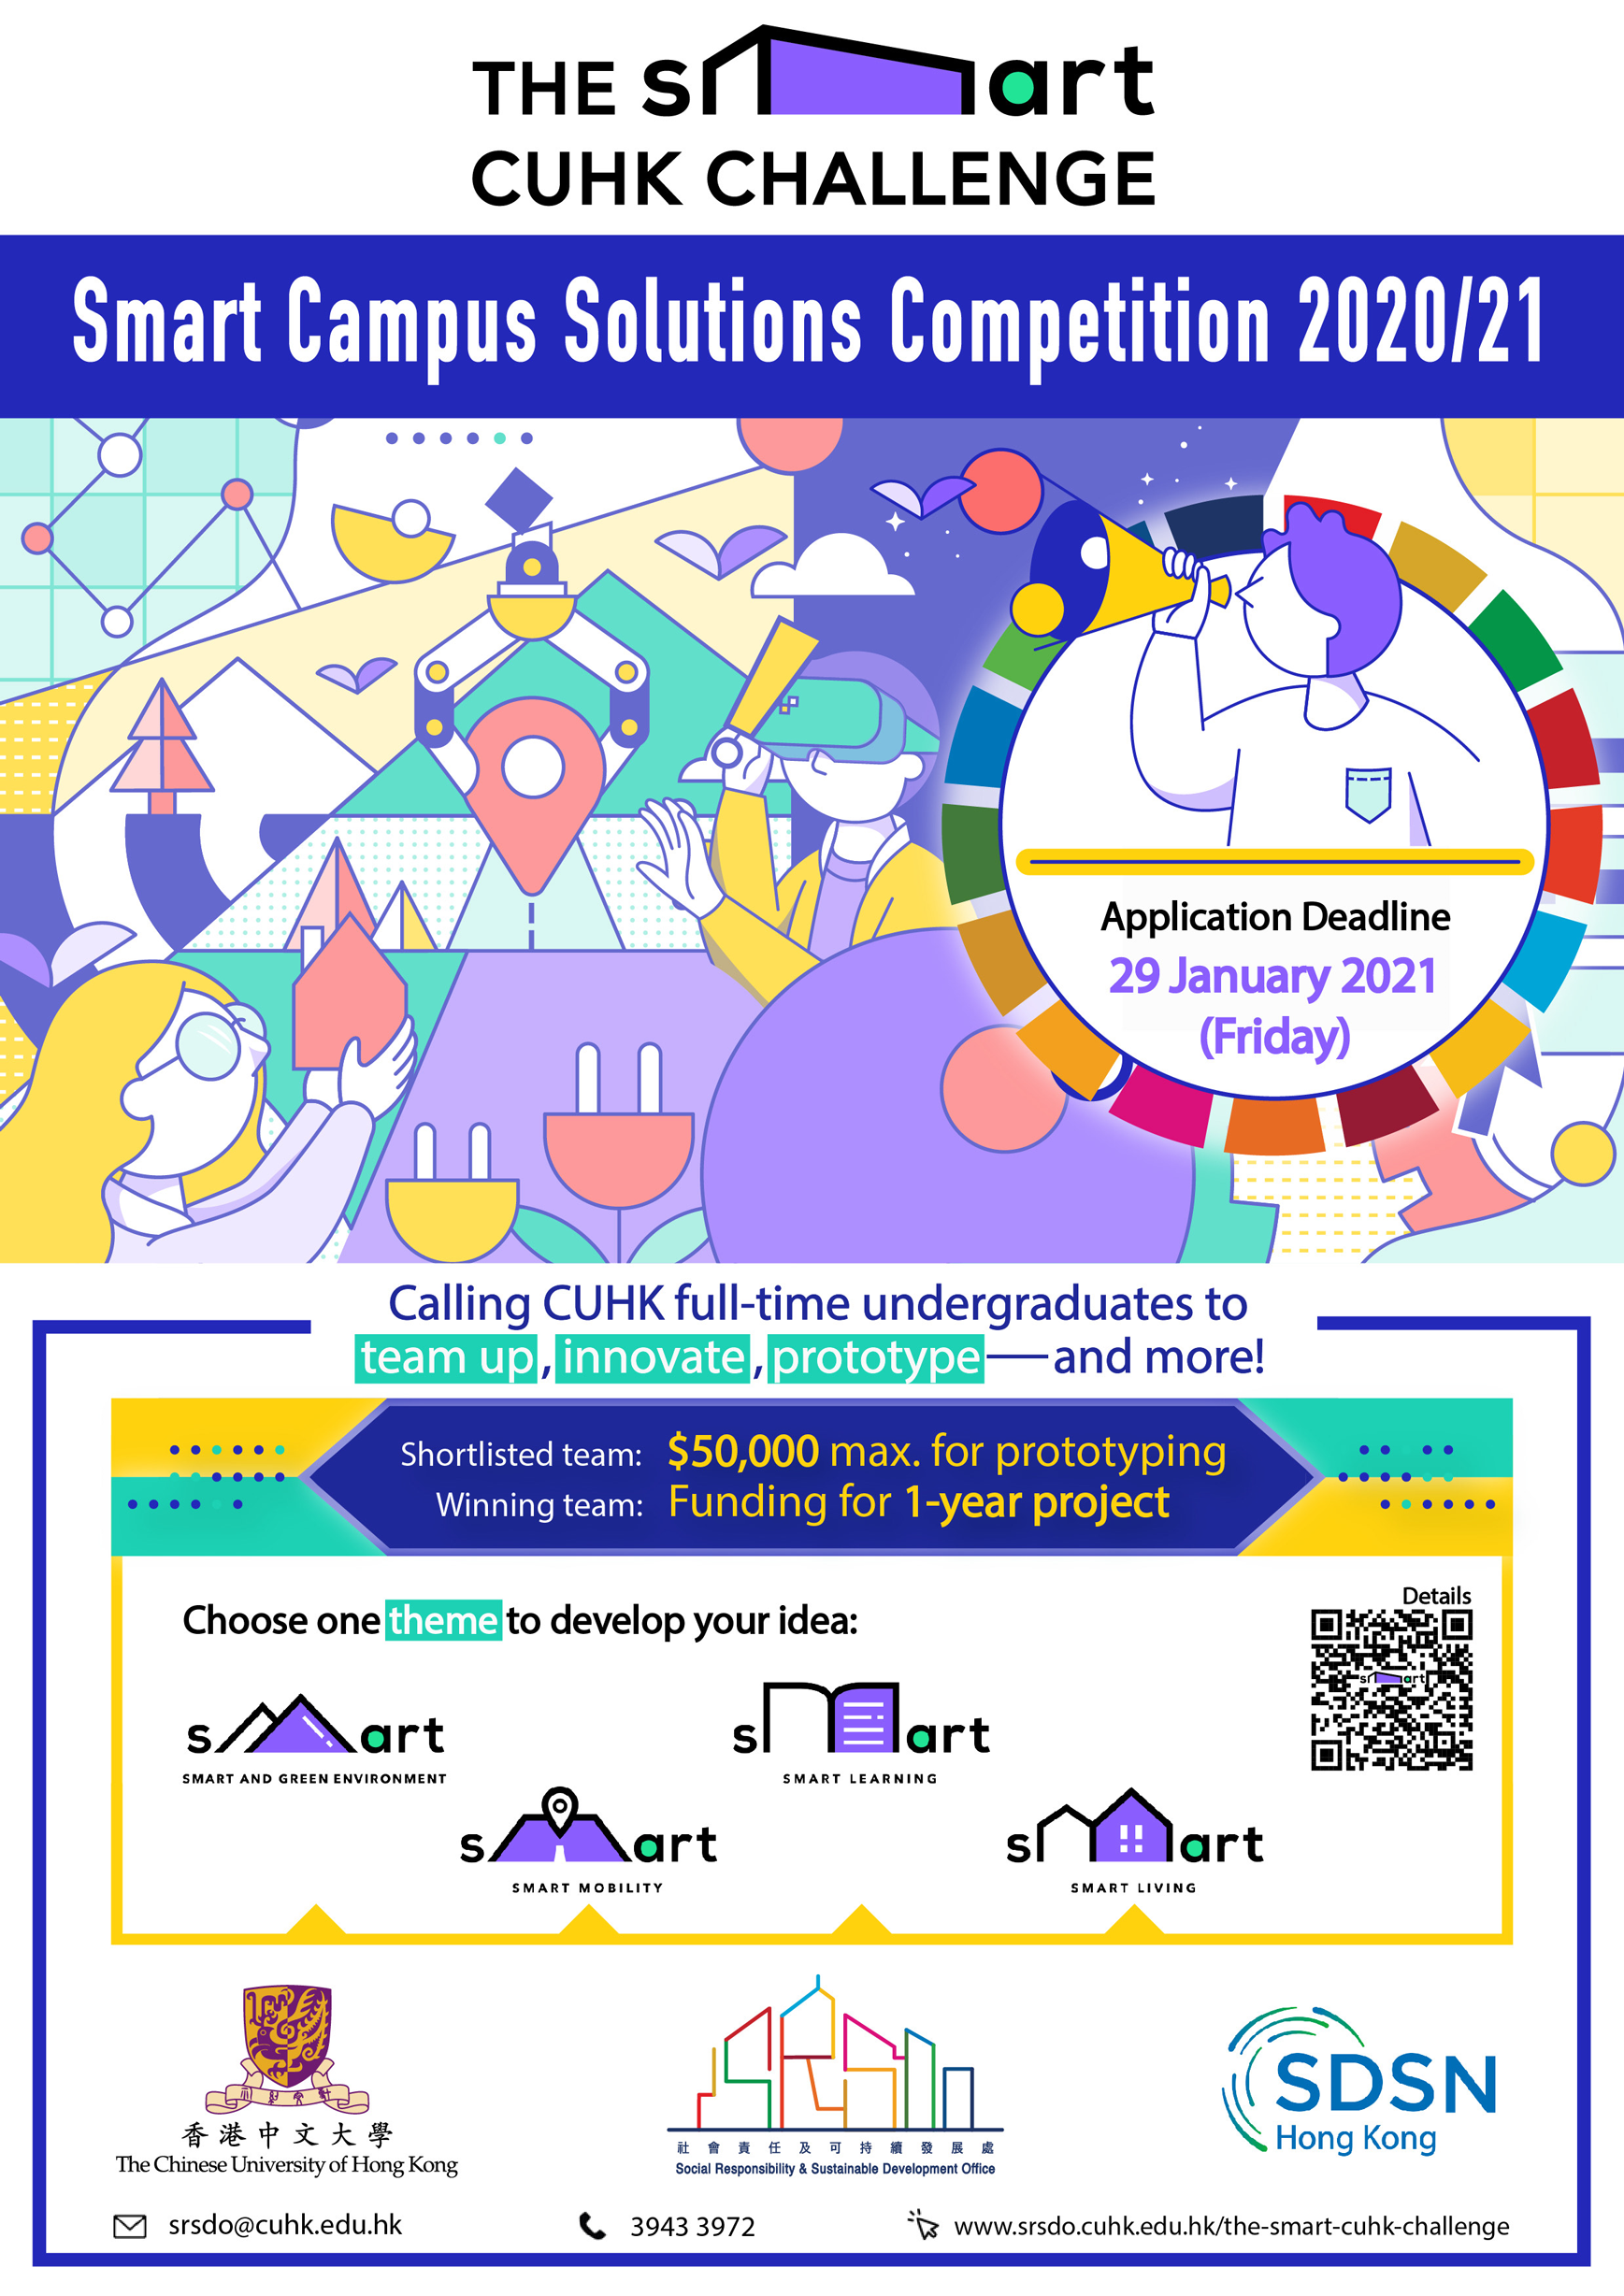 Smart Campus Solutions Competition 2020/21: Call for Applications